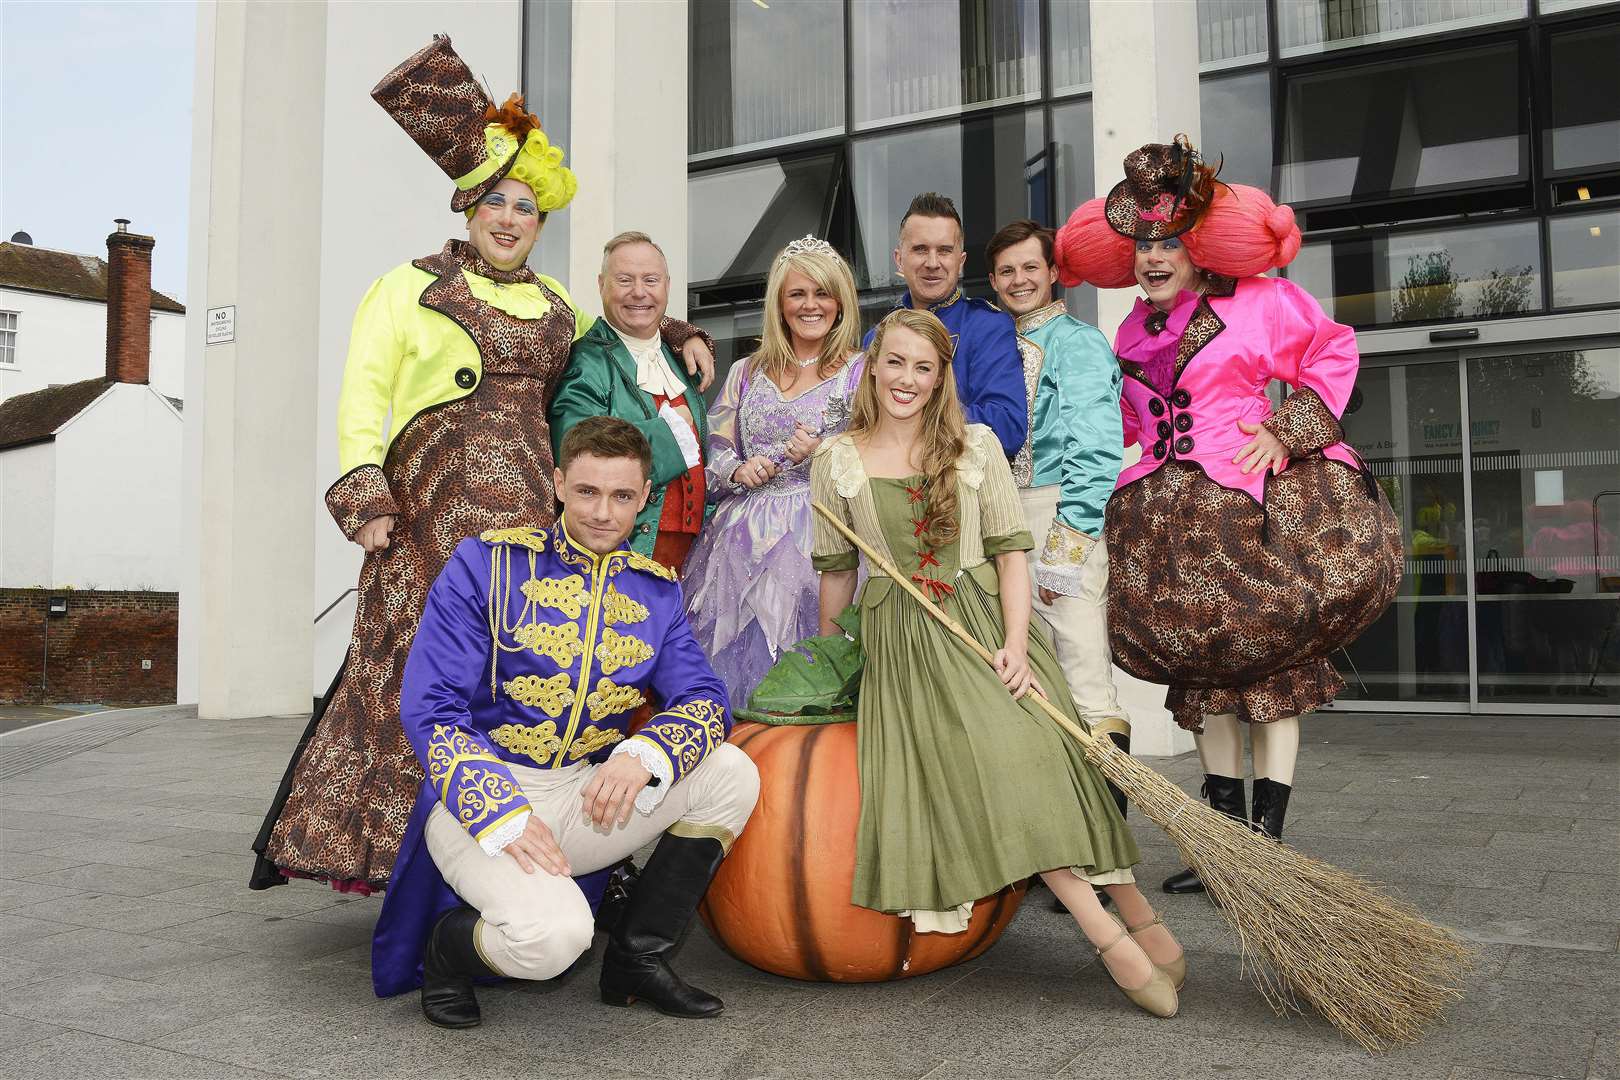 Take part in the treasure hunt for a chance to win tickets to this year's Marlowe Theatre pantomime